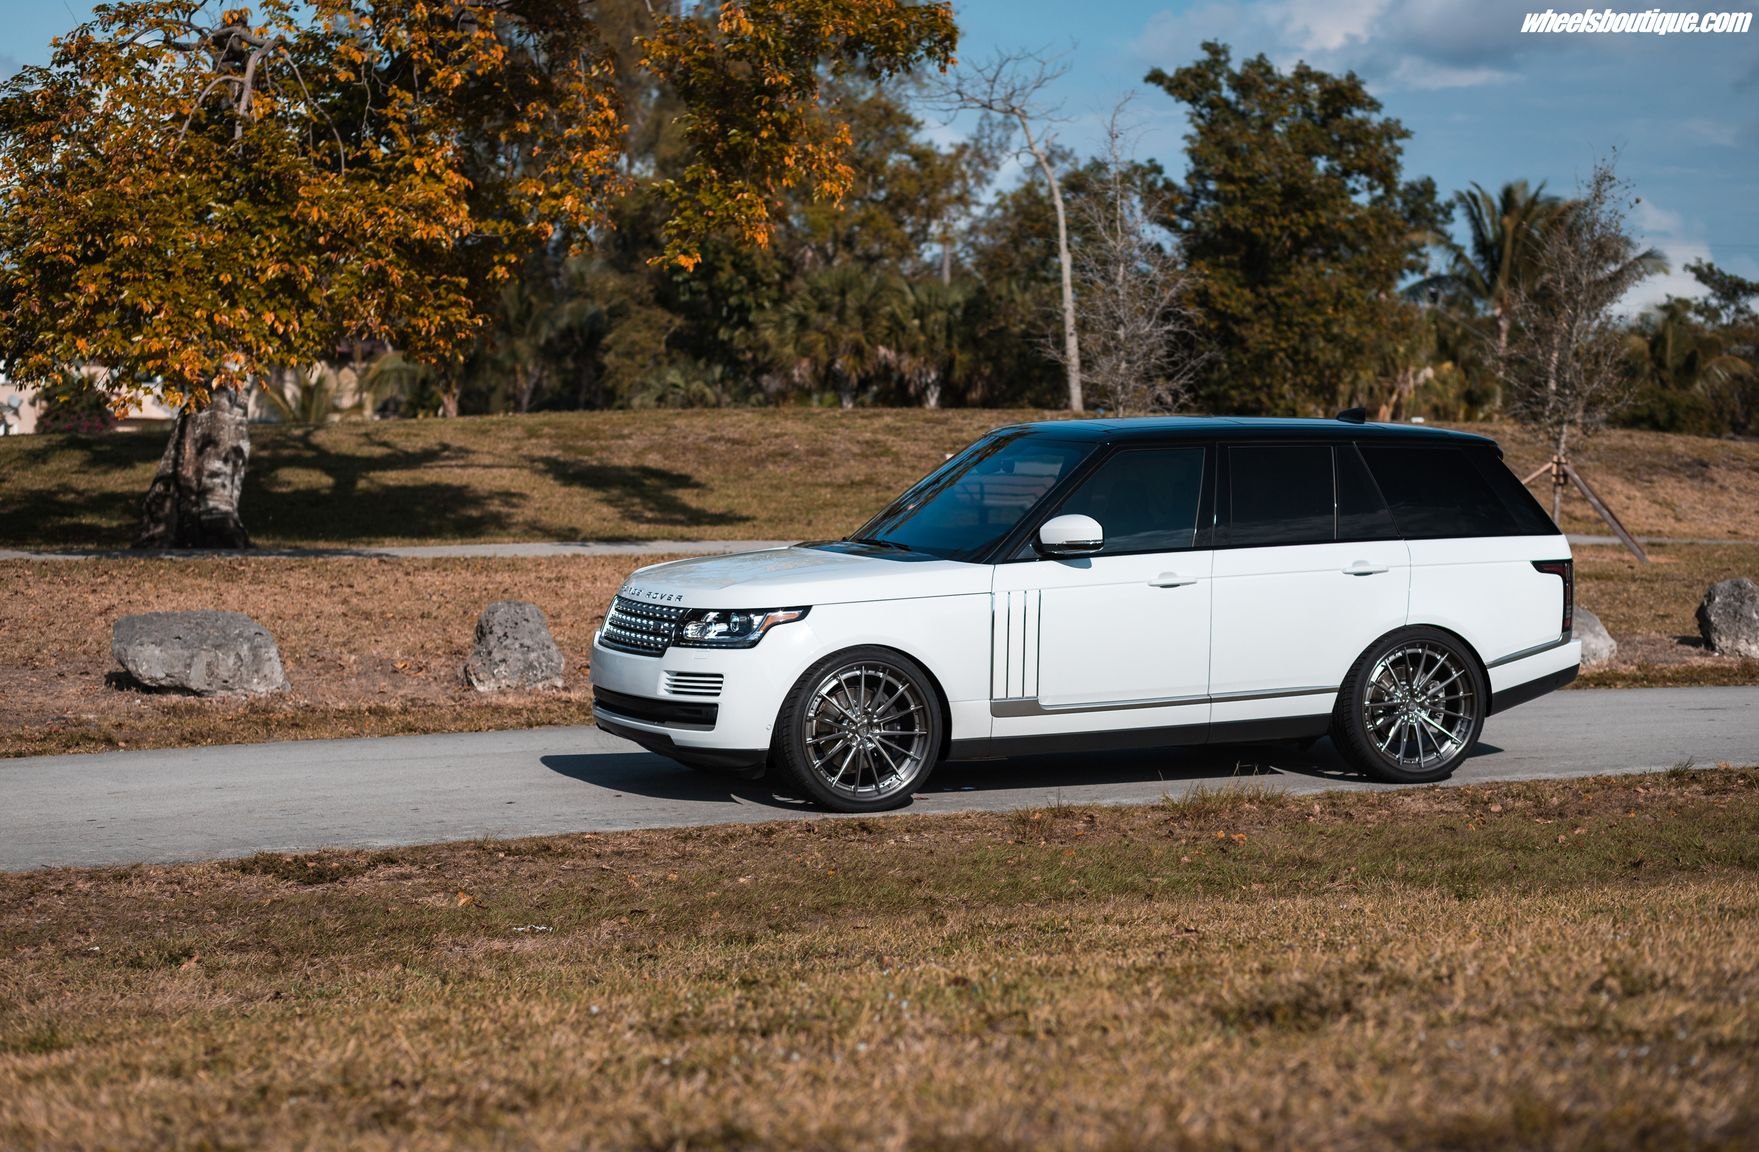 Aftermarket Side Skirts on White Range Rover - Photo by Anrky Wheels